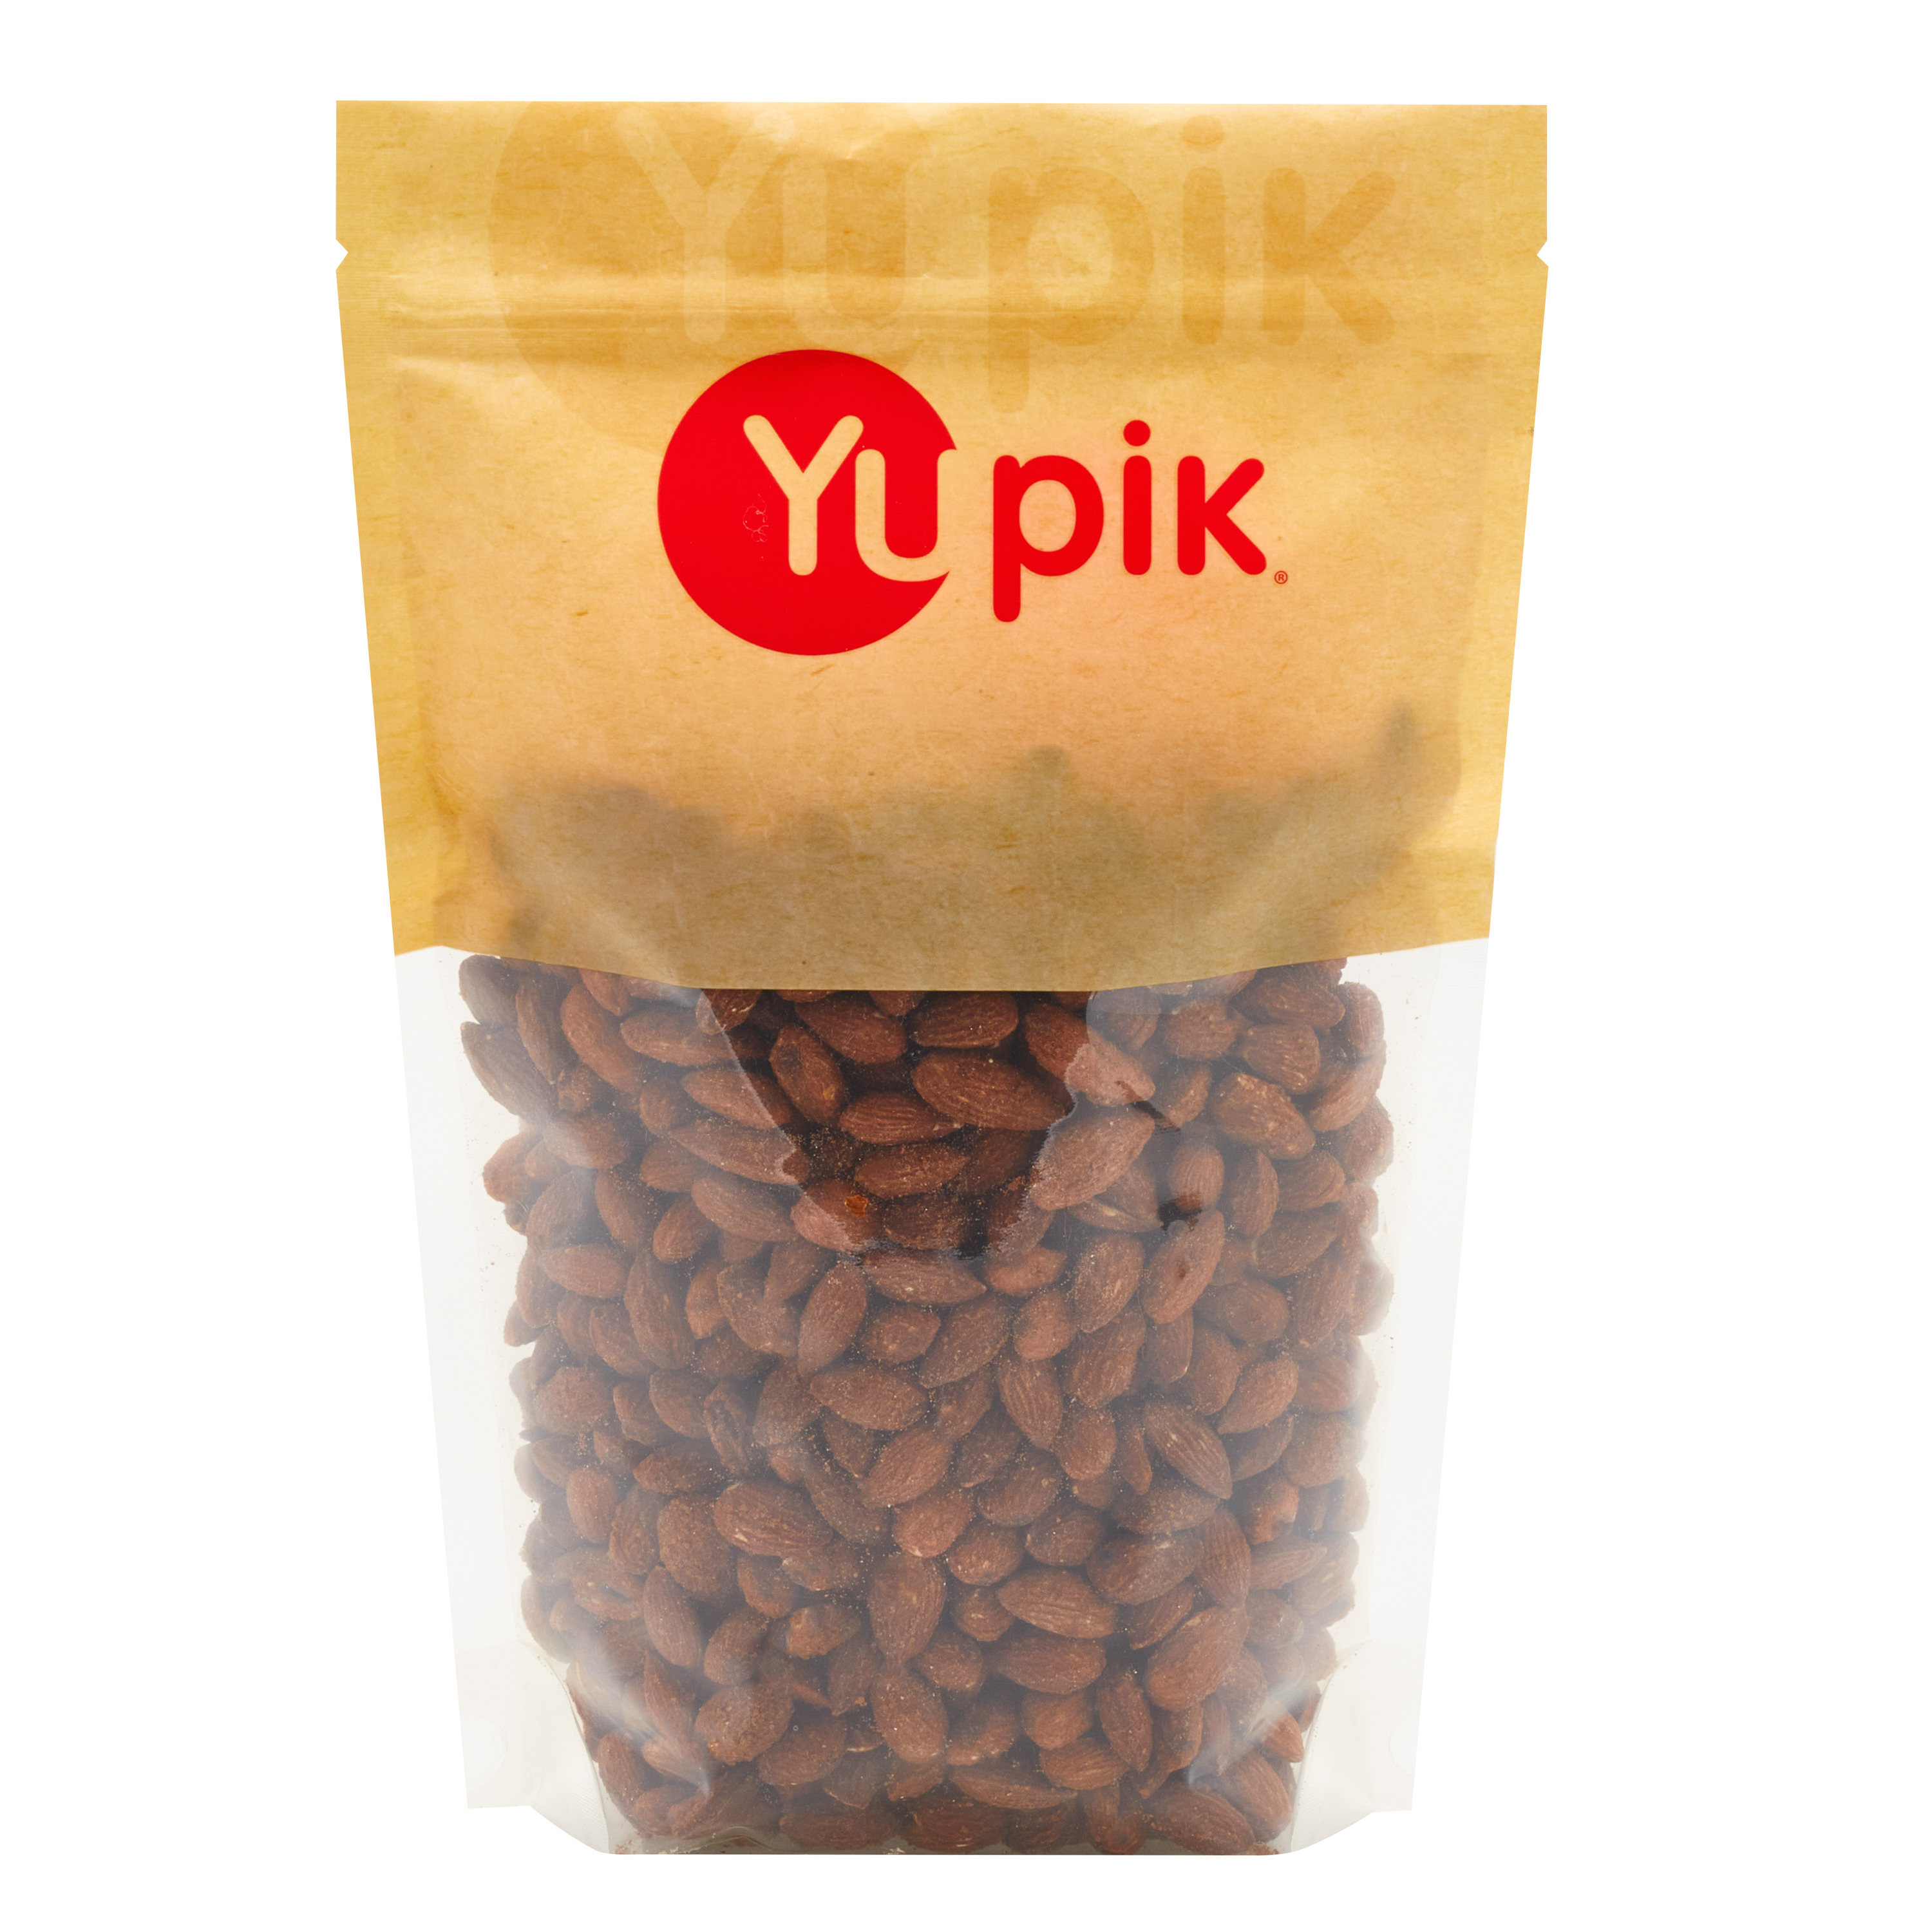 Almonds, Smoked seasoning [sugars (maltodextrin), salt, natural smoke flavour, yeast extract, hydrolyzed plant proteins (corn, soy), silicon dioxide (anti-caking agent)],  Non-GMO canola oilThis product may occasionally contain shell pieces